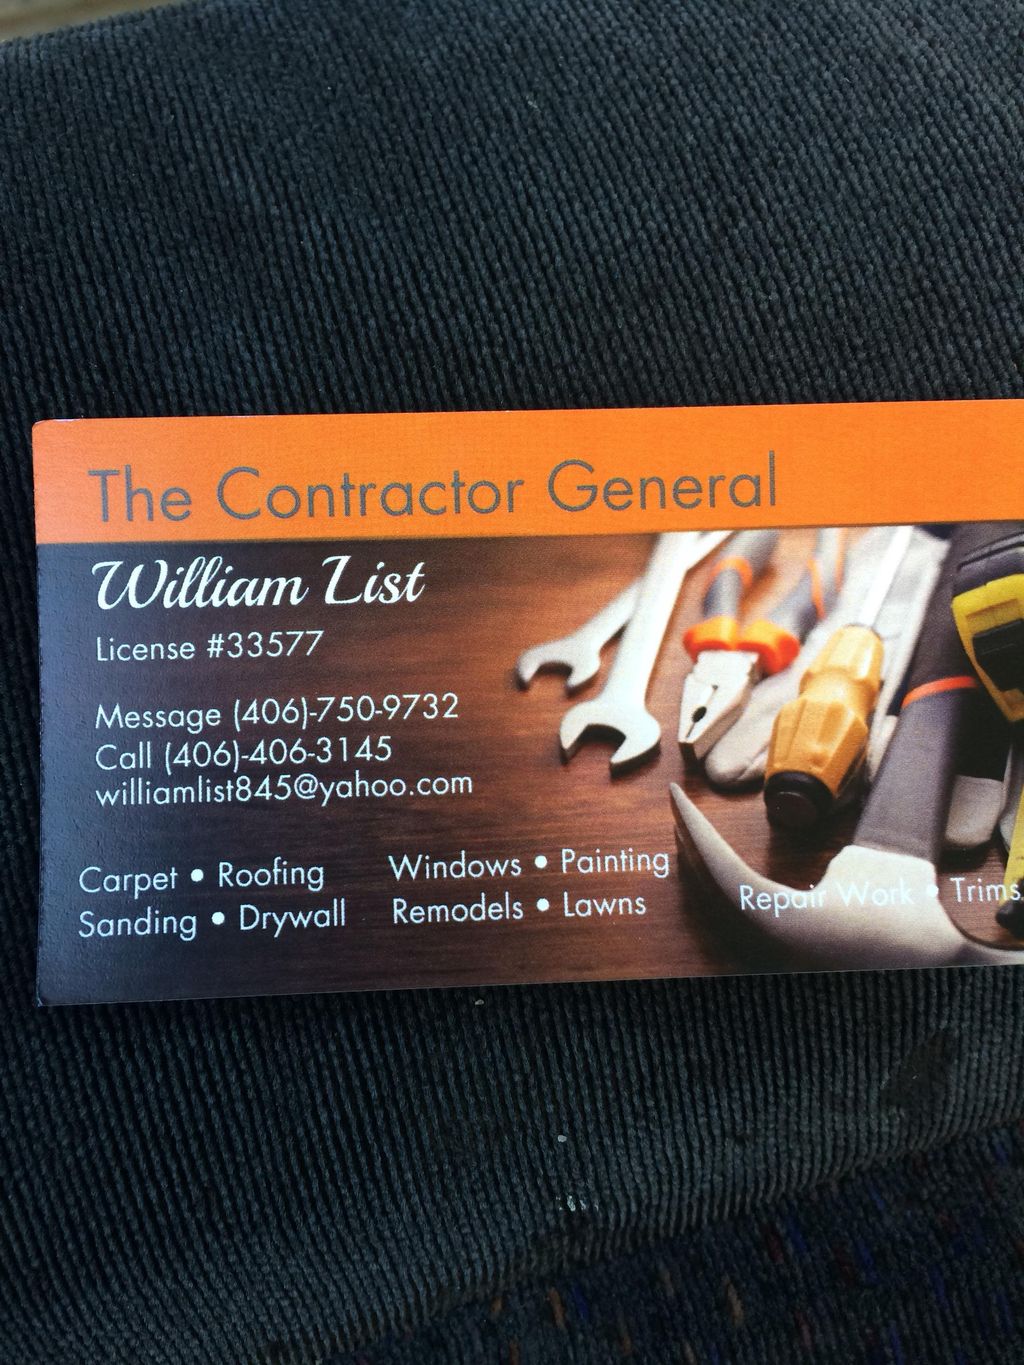 The Contractor General / William List